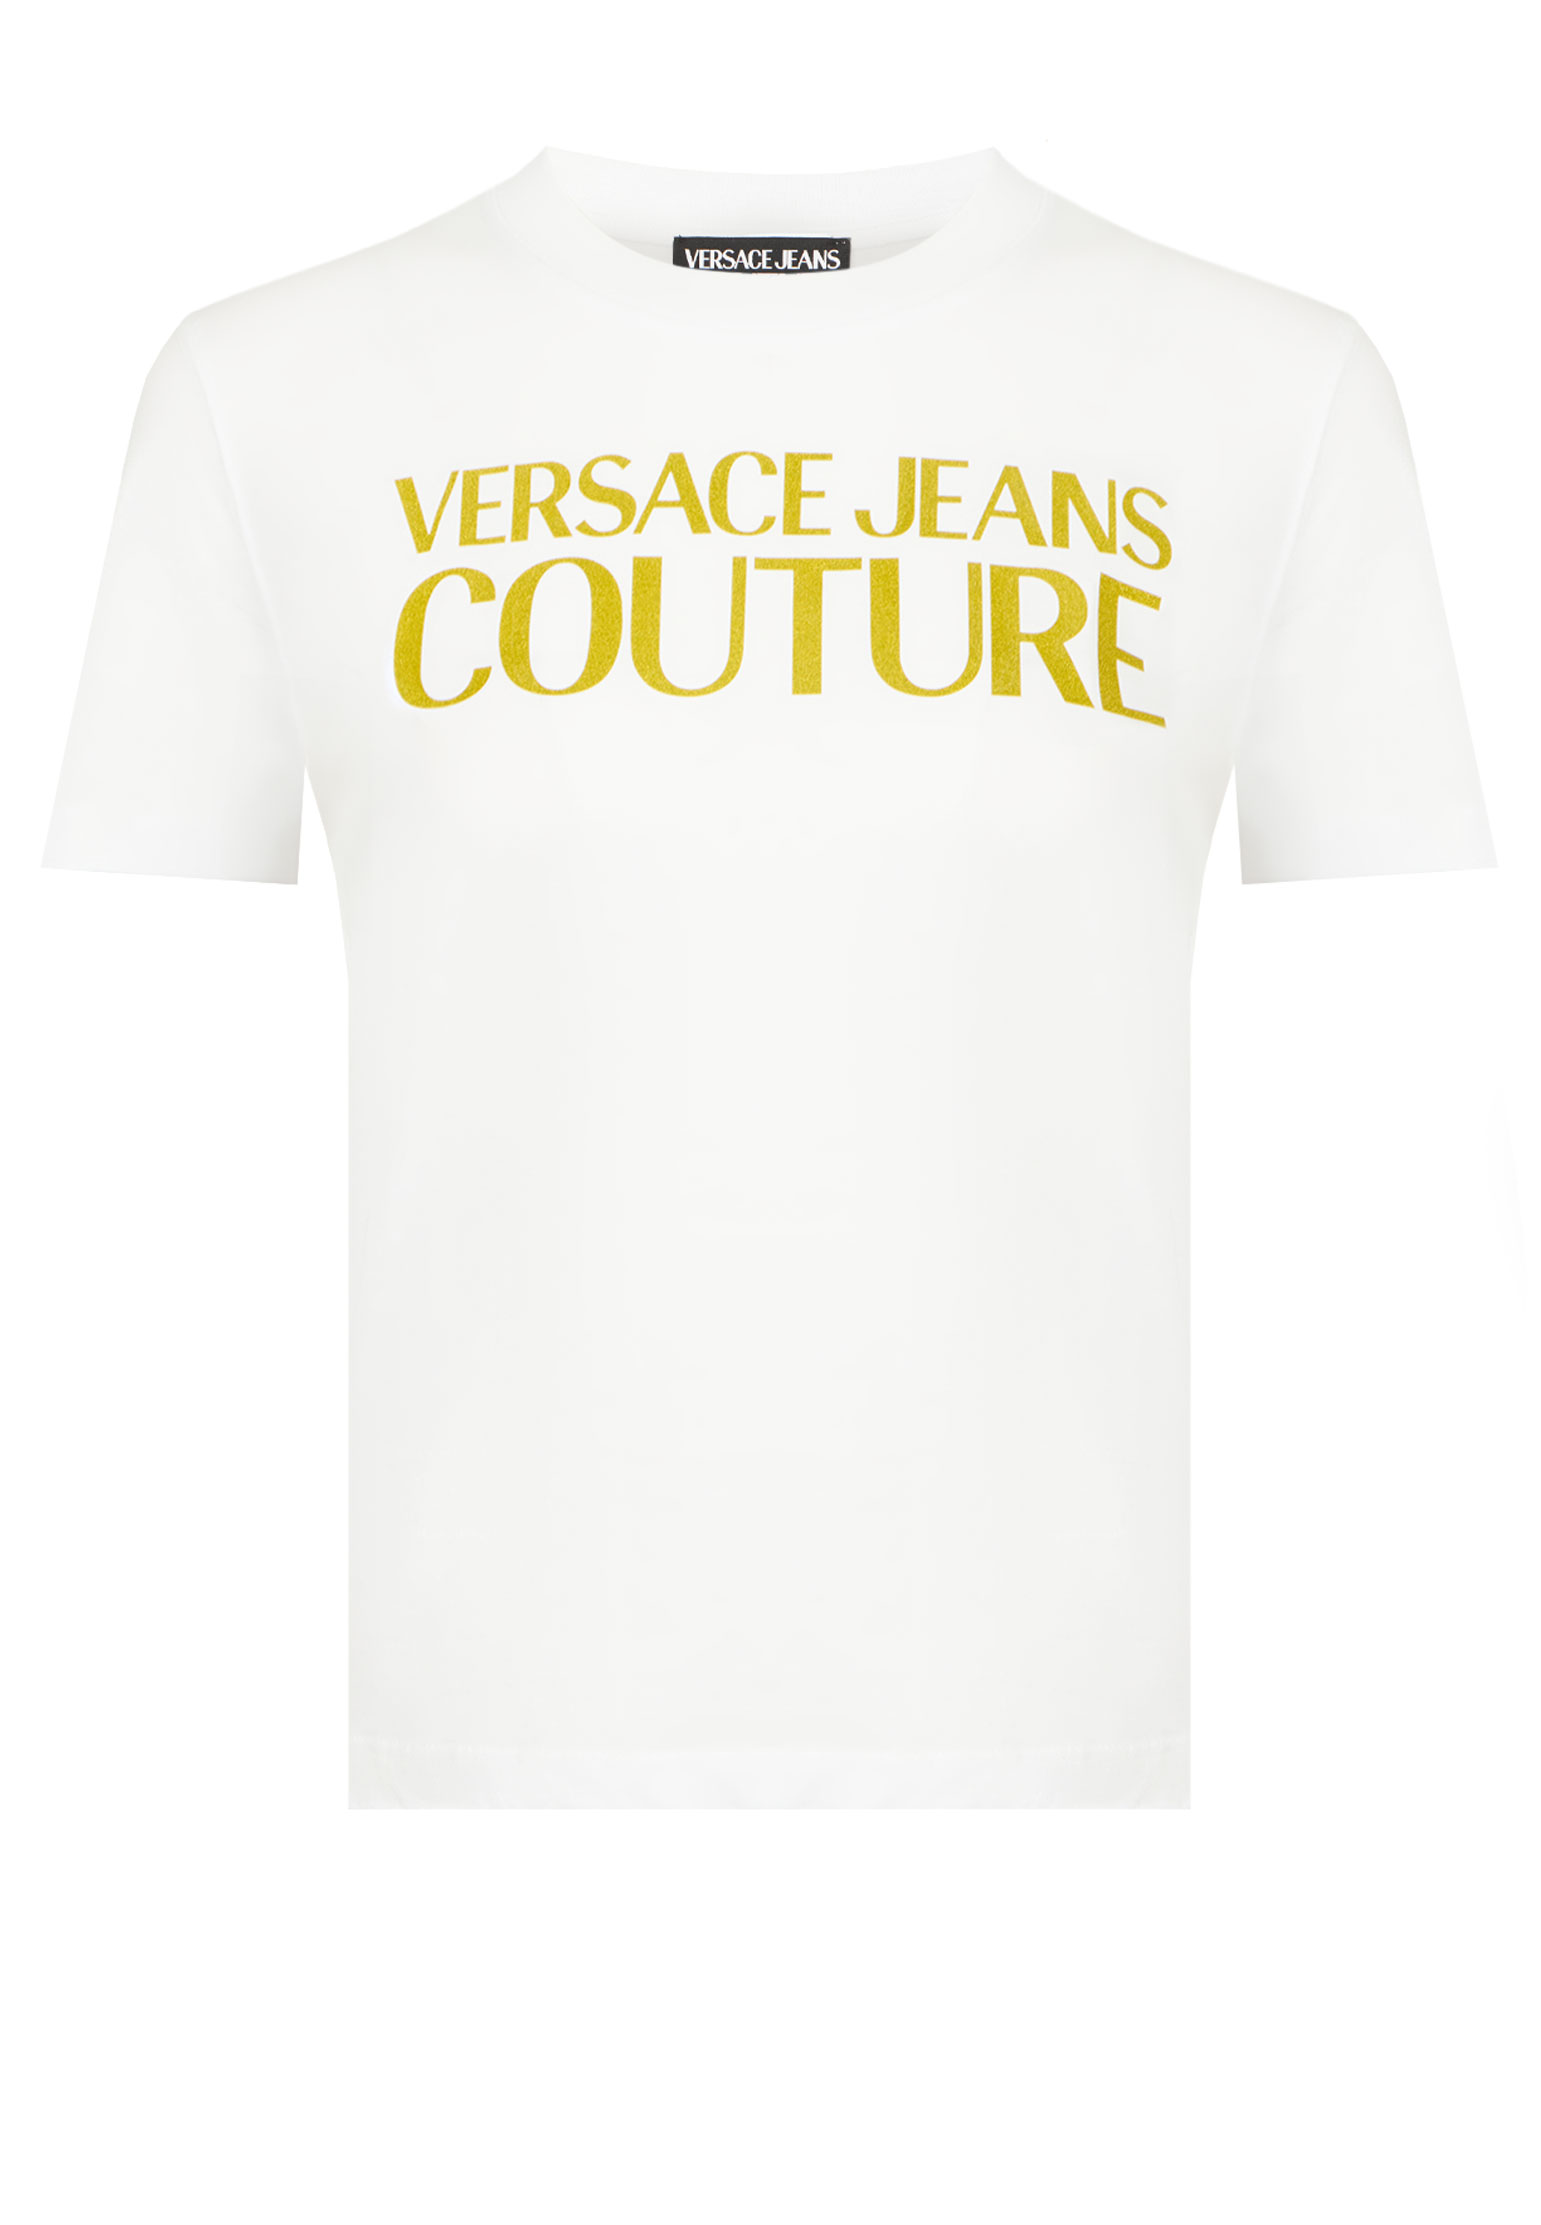 Футболка VERSACE JEANS COUTURE Белый, размер L